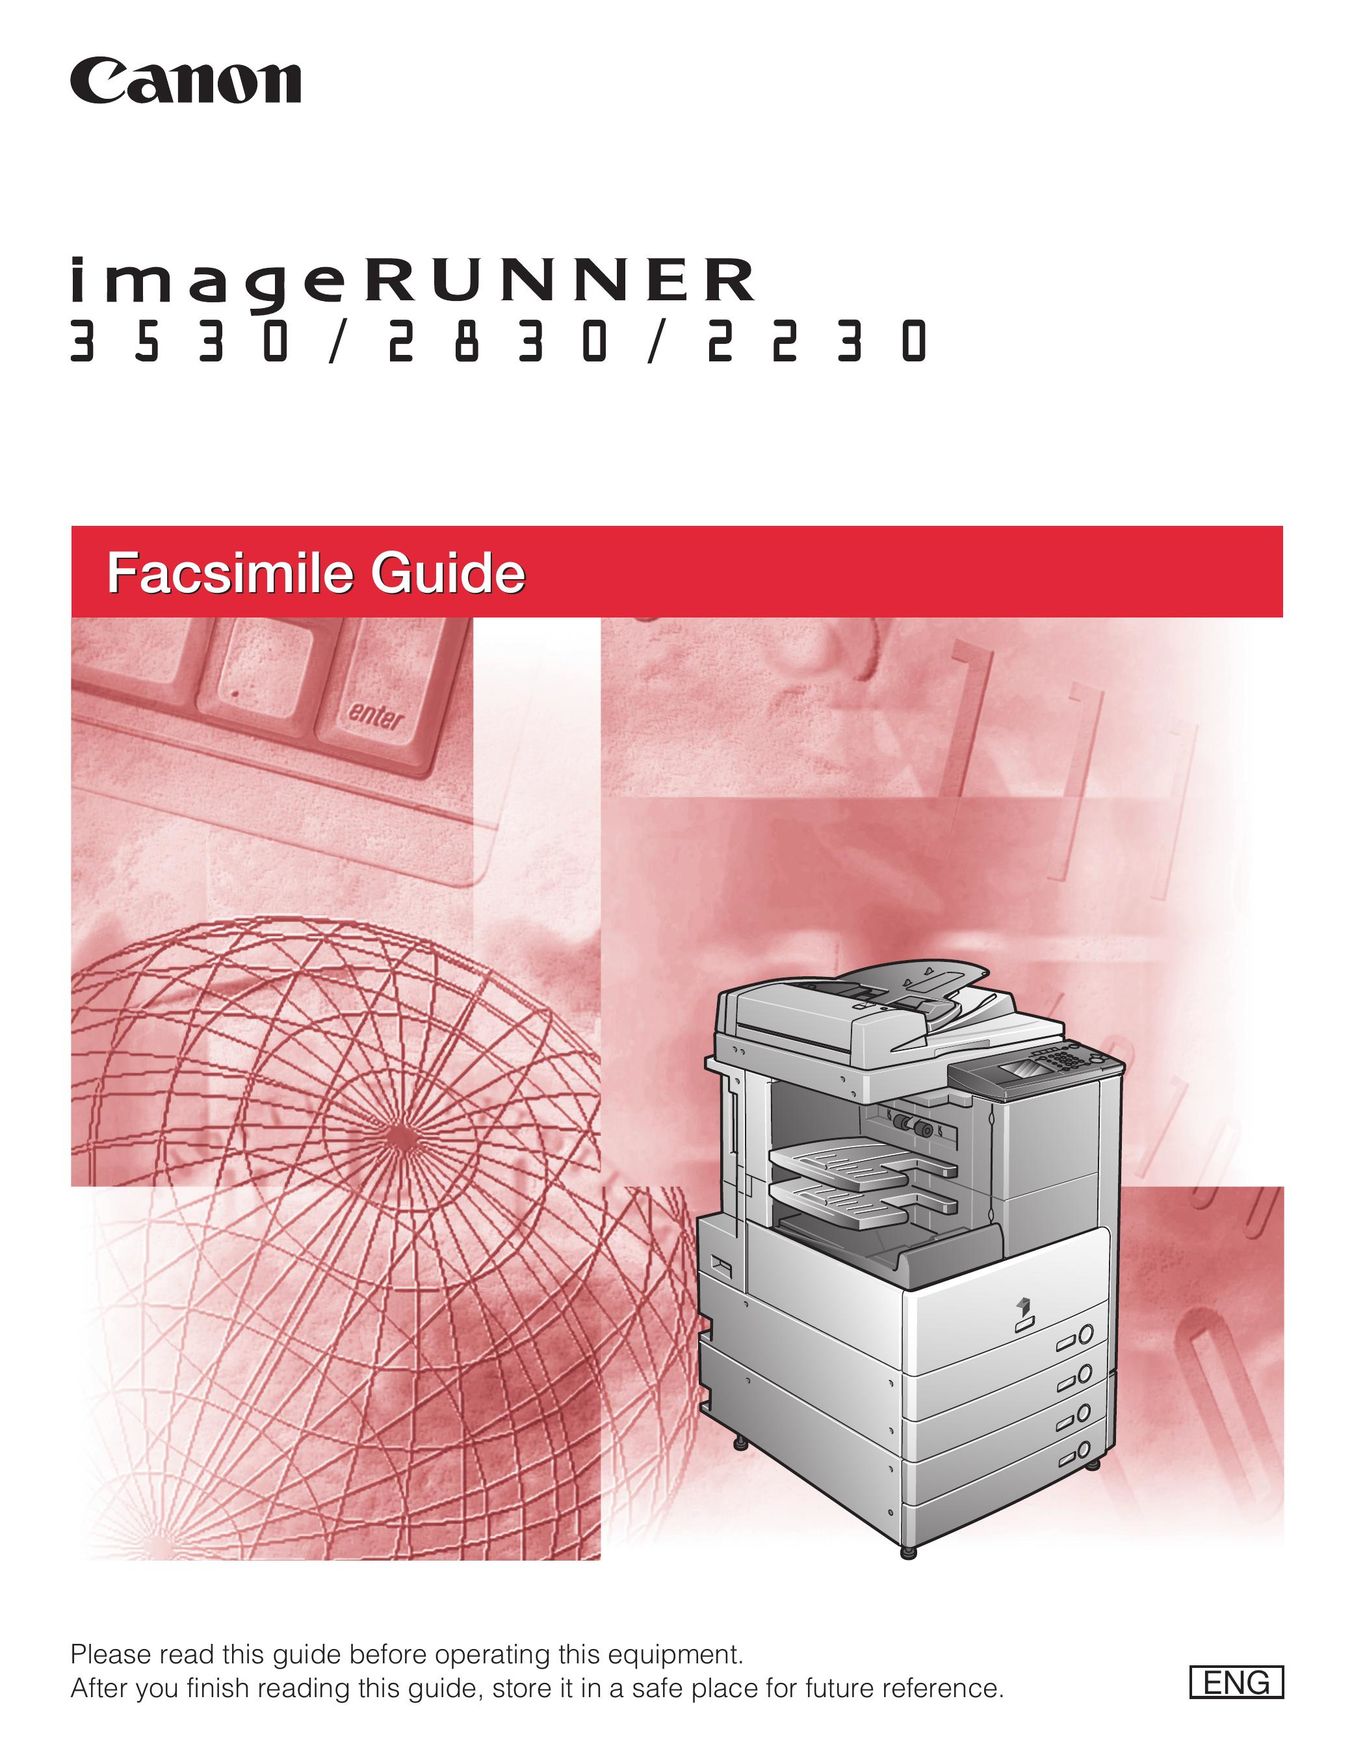 Canon 2830 All in One Printer User Manual